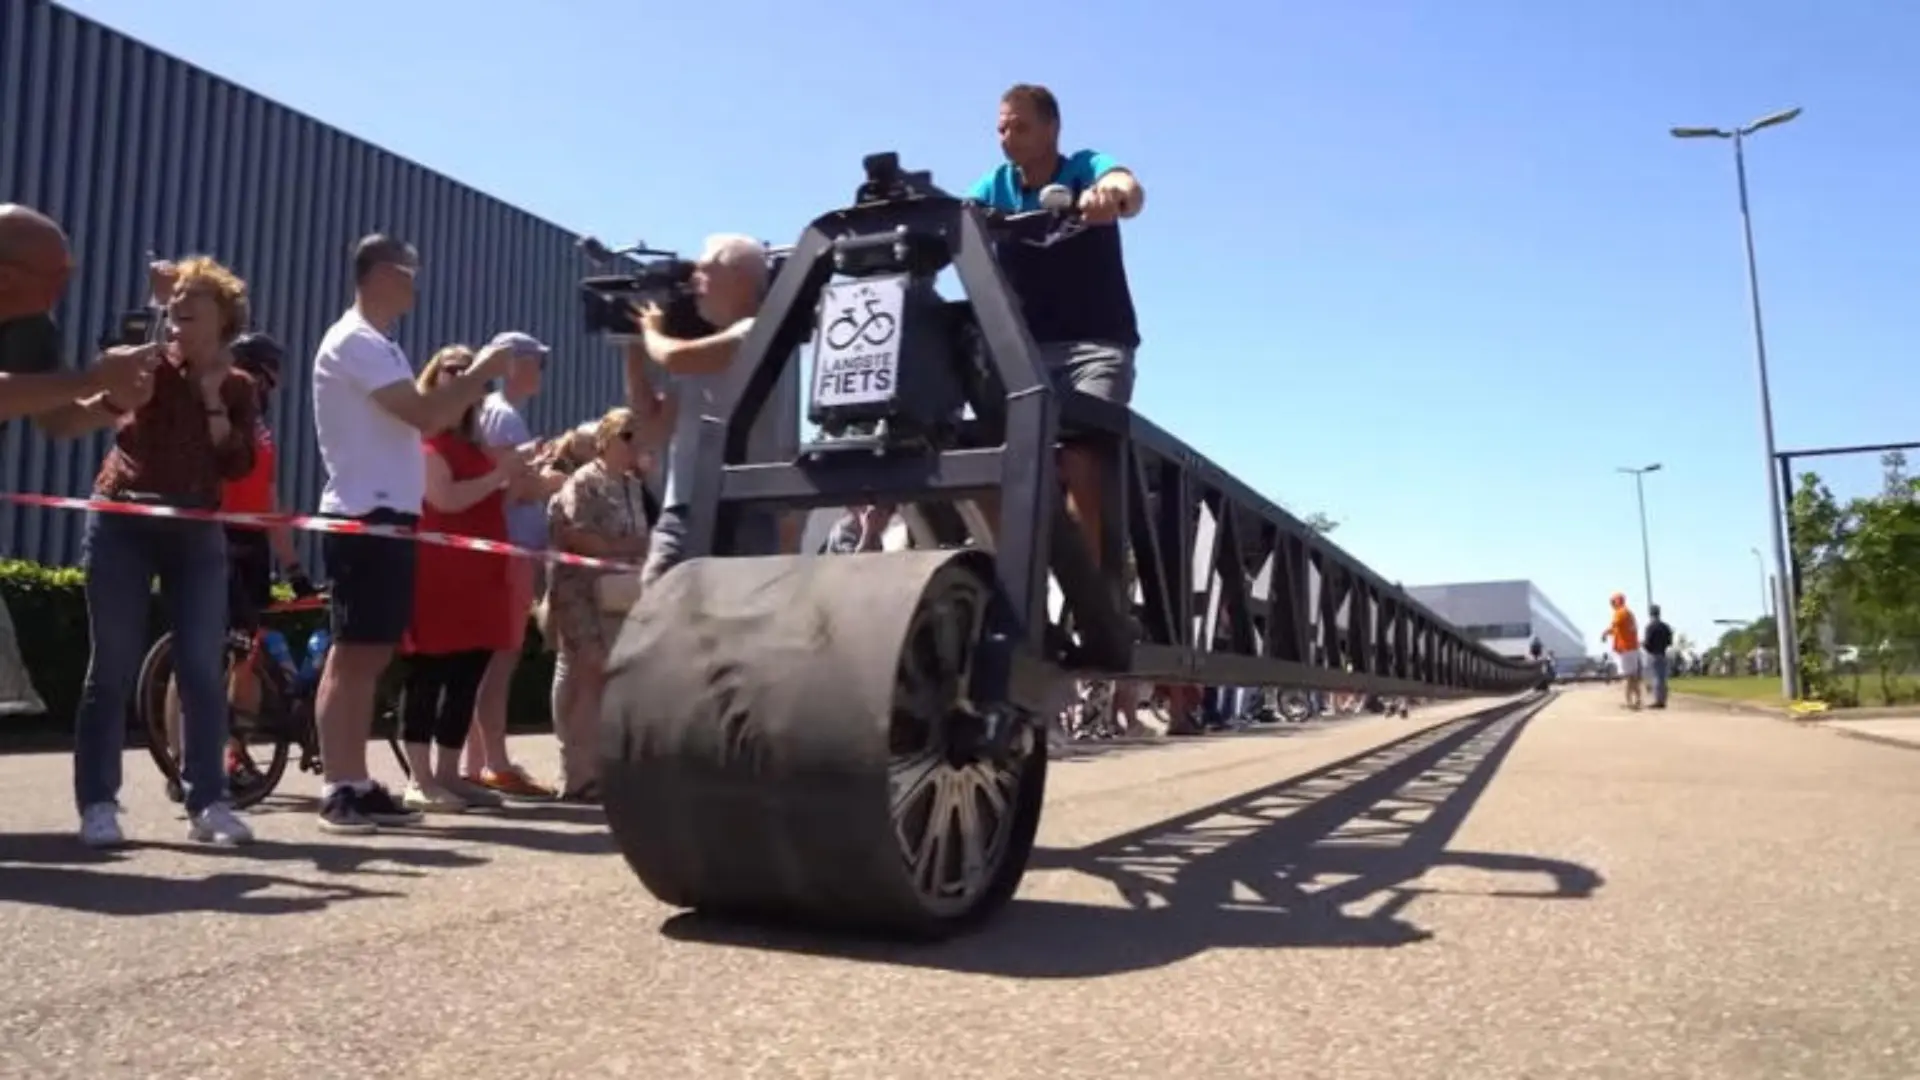 WATCH: Dutch man builds world’s longest bicycle measuring 180 feet 11 inches